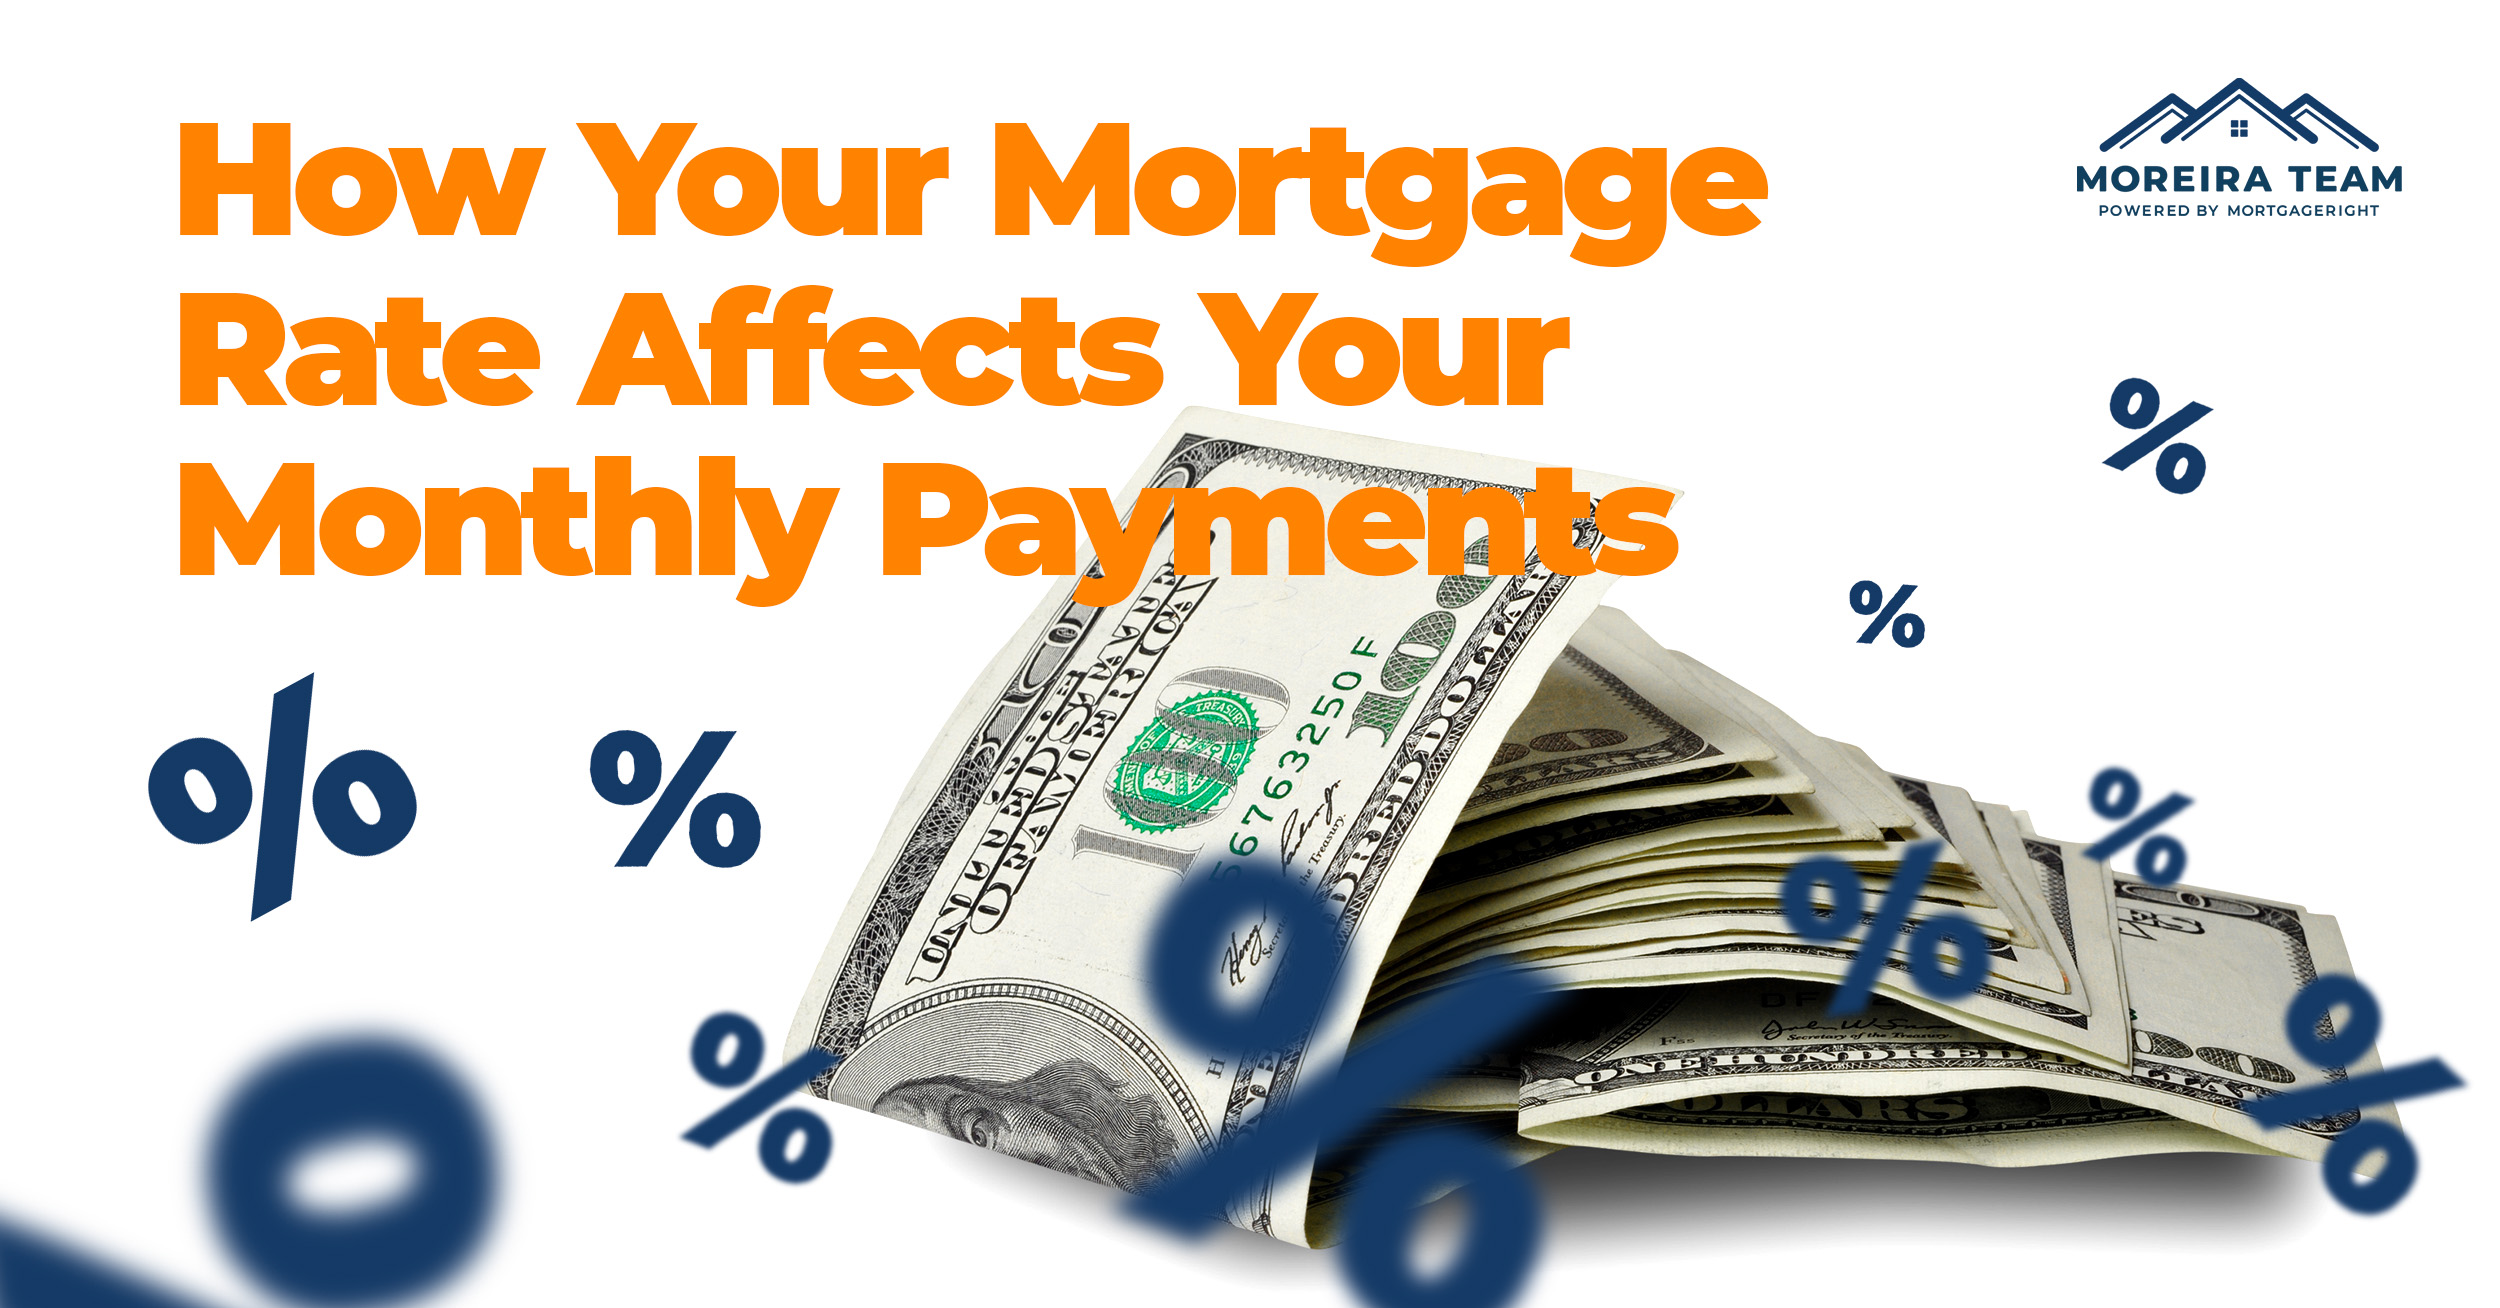 How Does Your Mortgage Rate Affect Your Monthly Mortgage Payments?